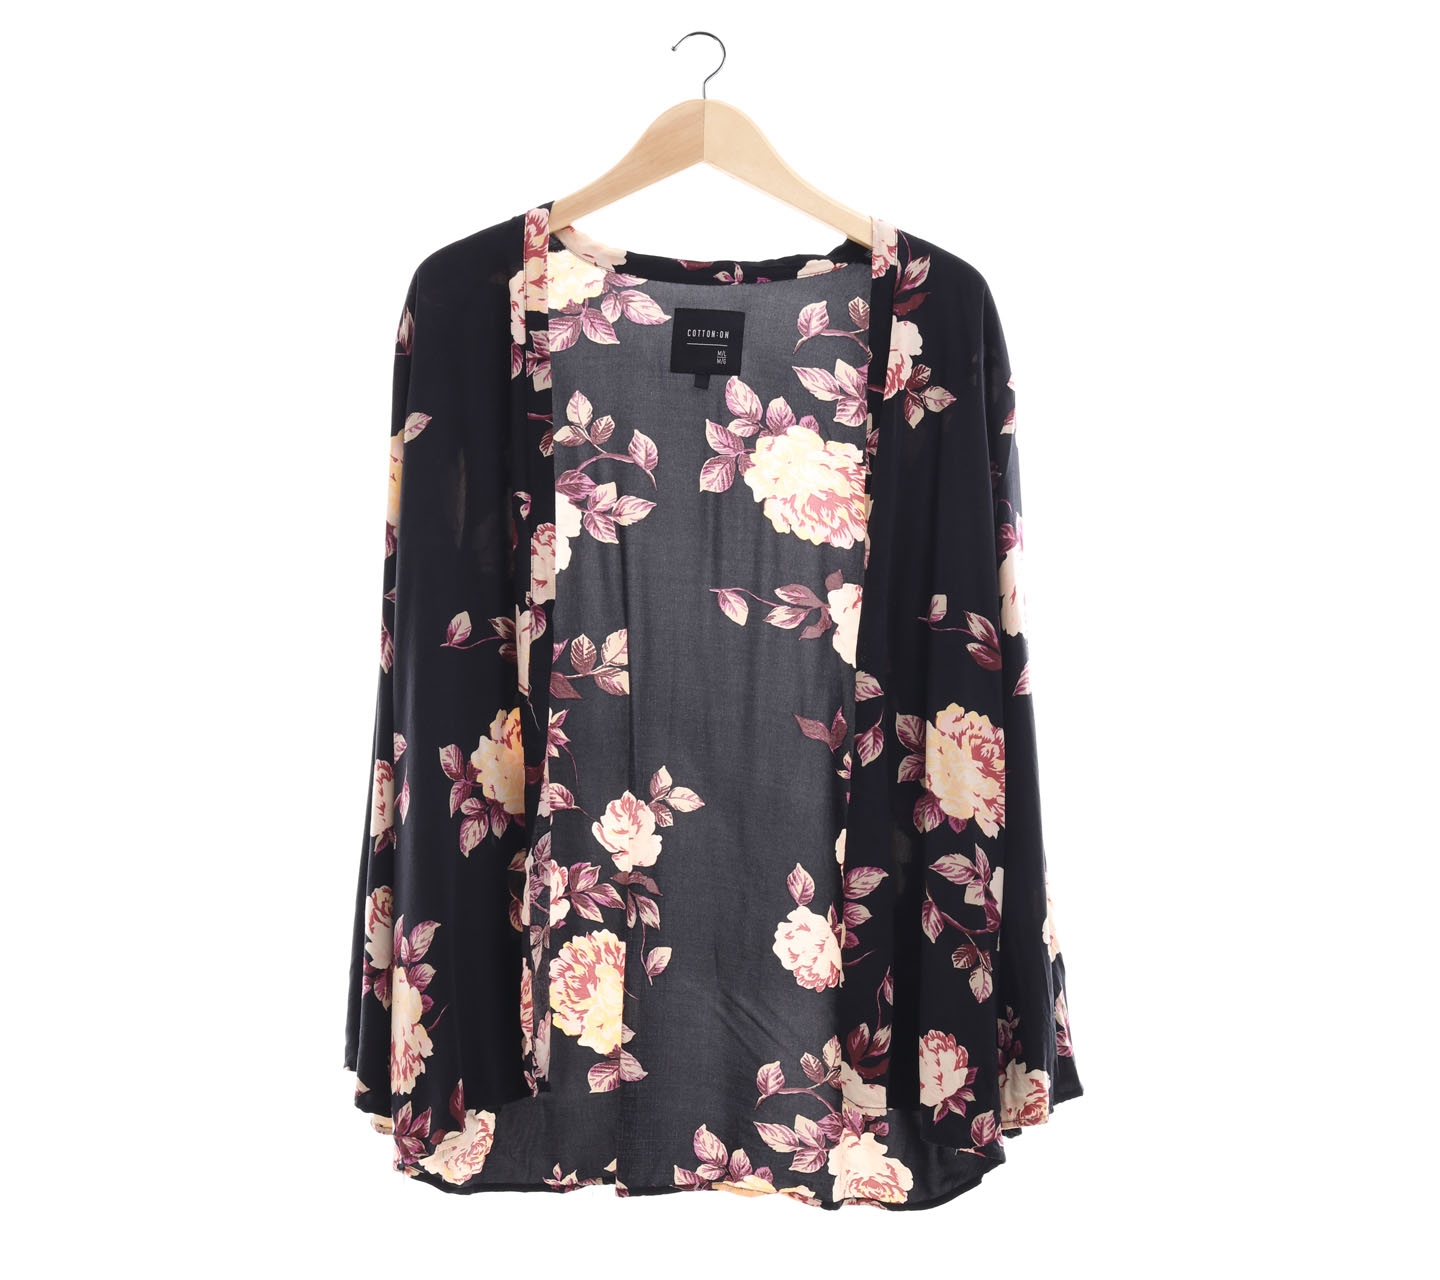 Cotton On Black Printed Floral Outerwear